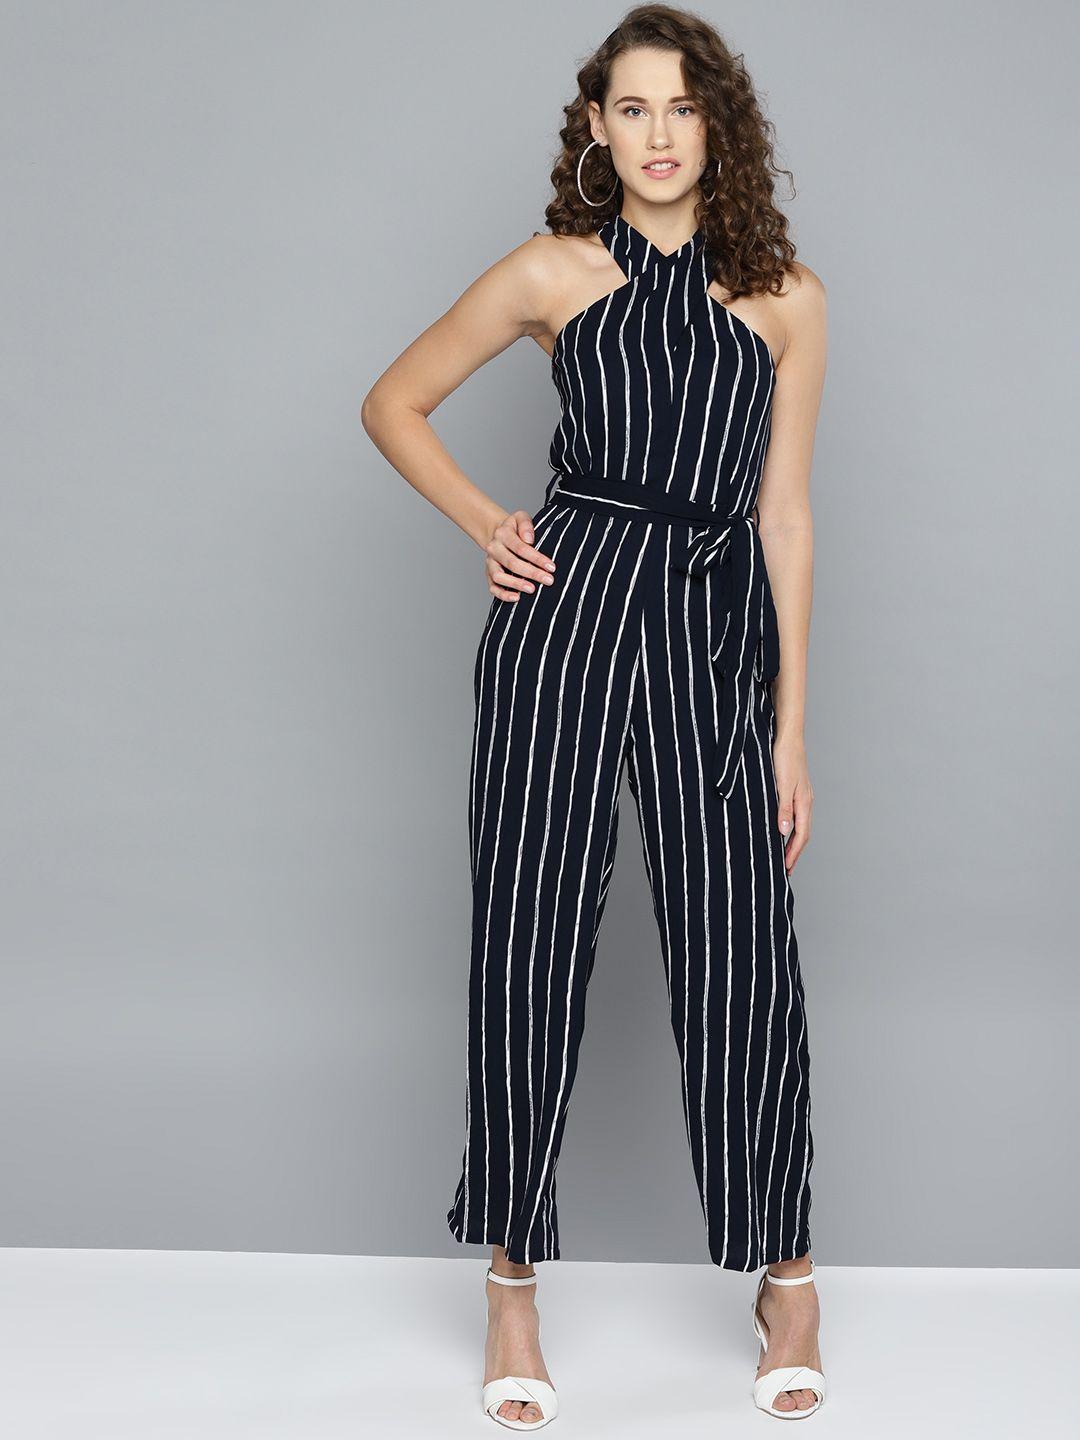 marie-claire-women-navy-blue-&-white-striped-basic-jumpsuit